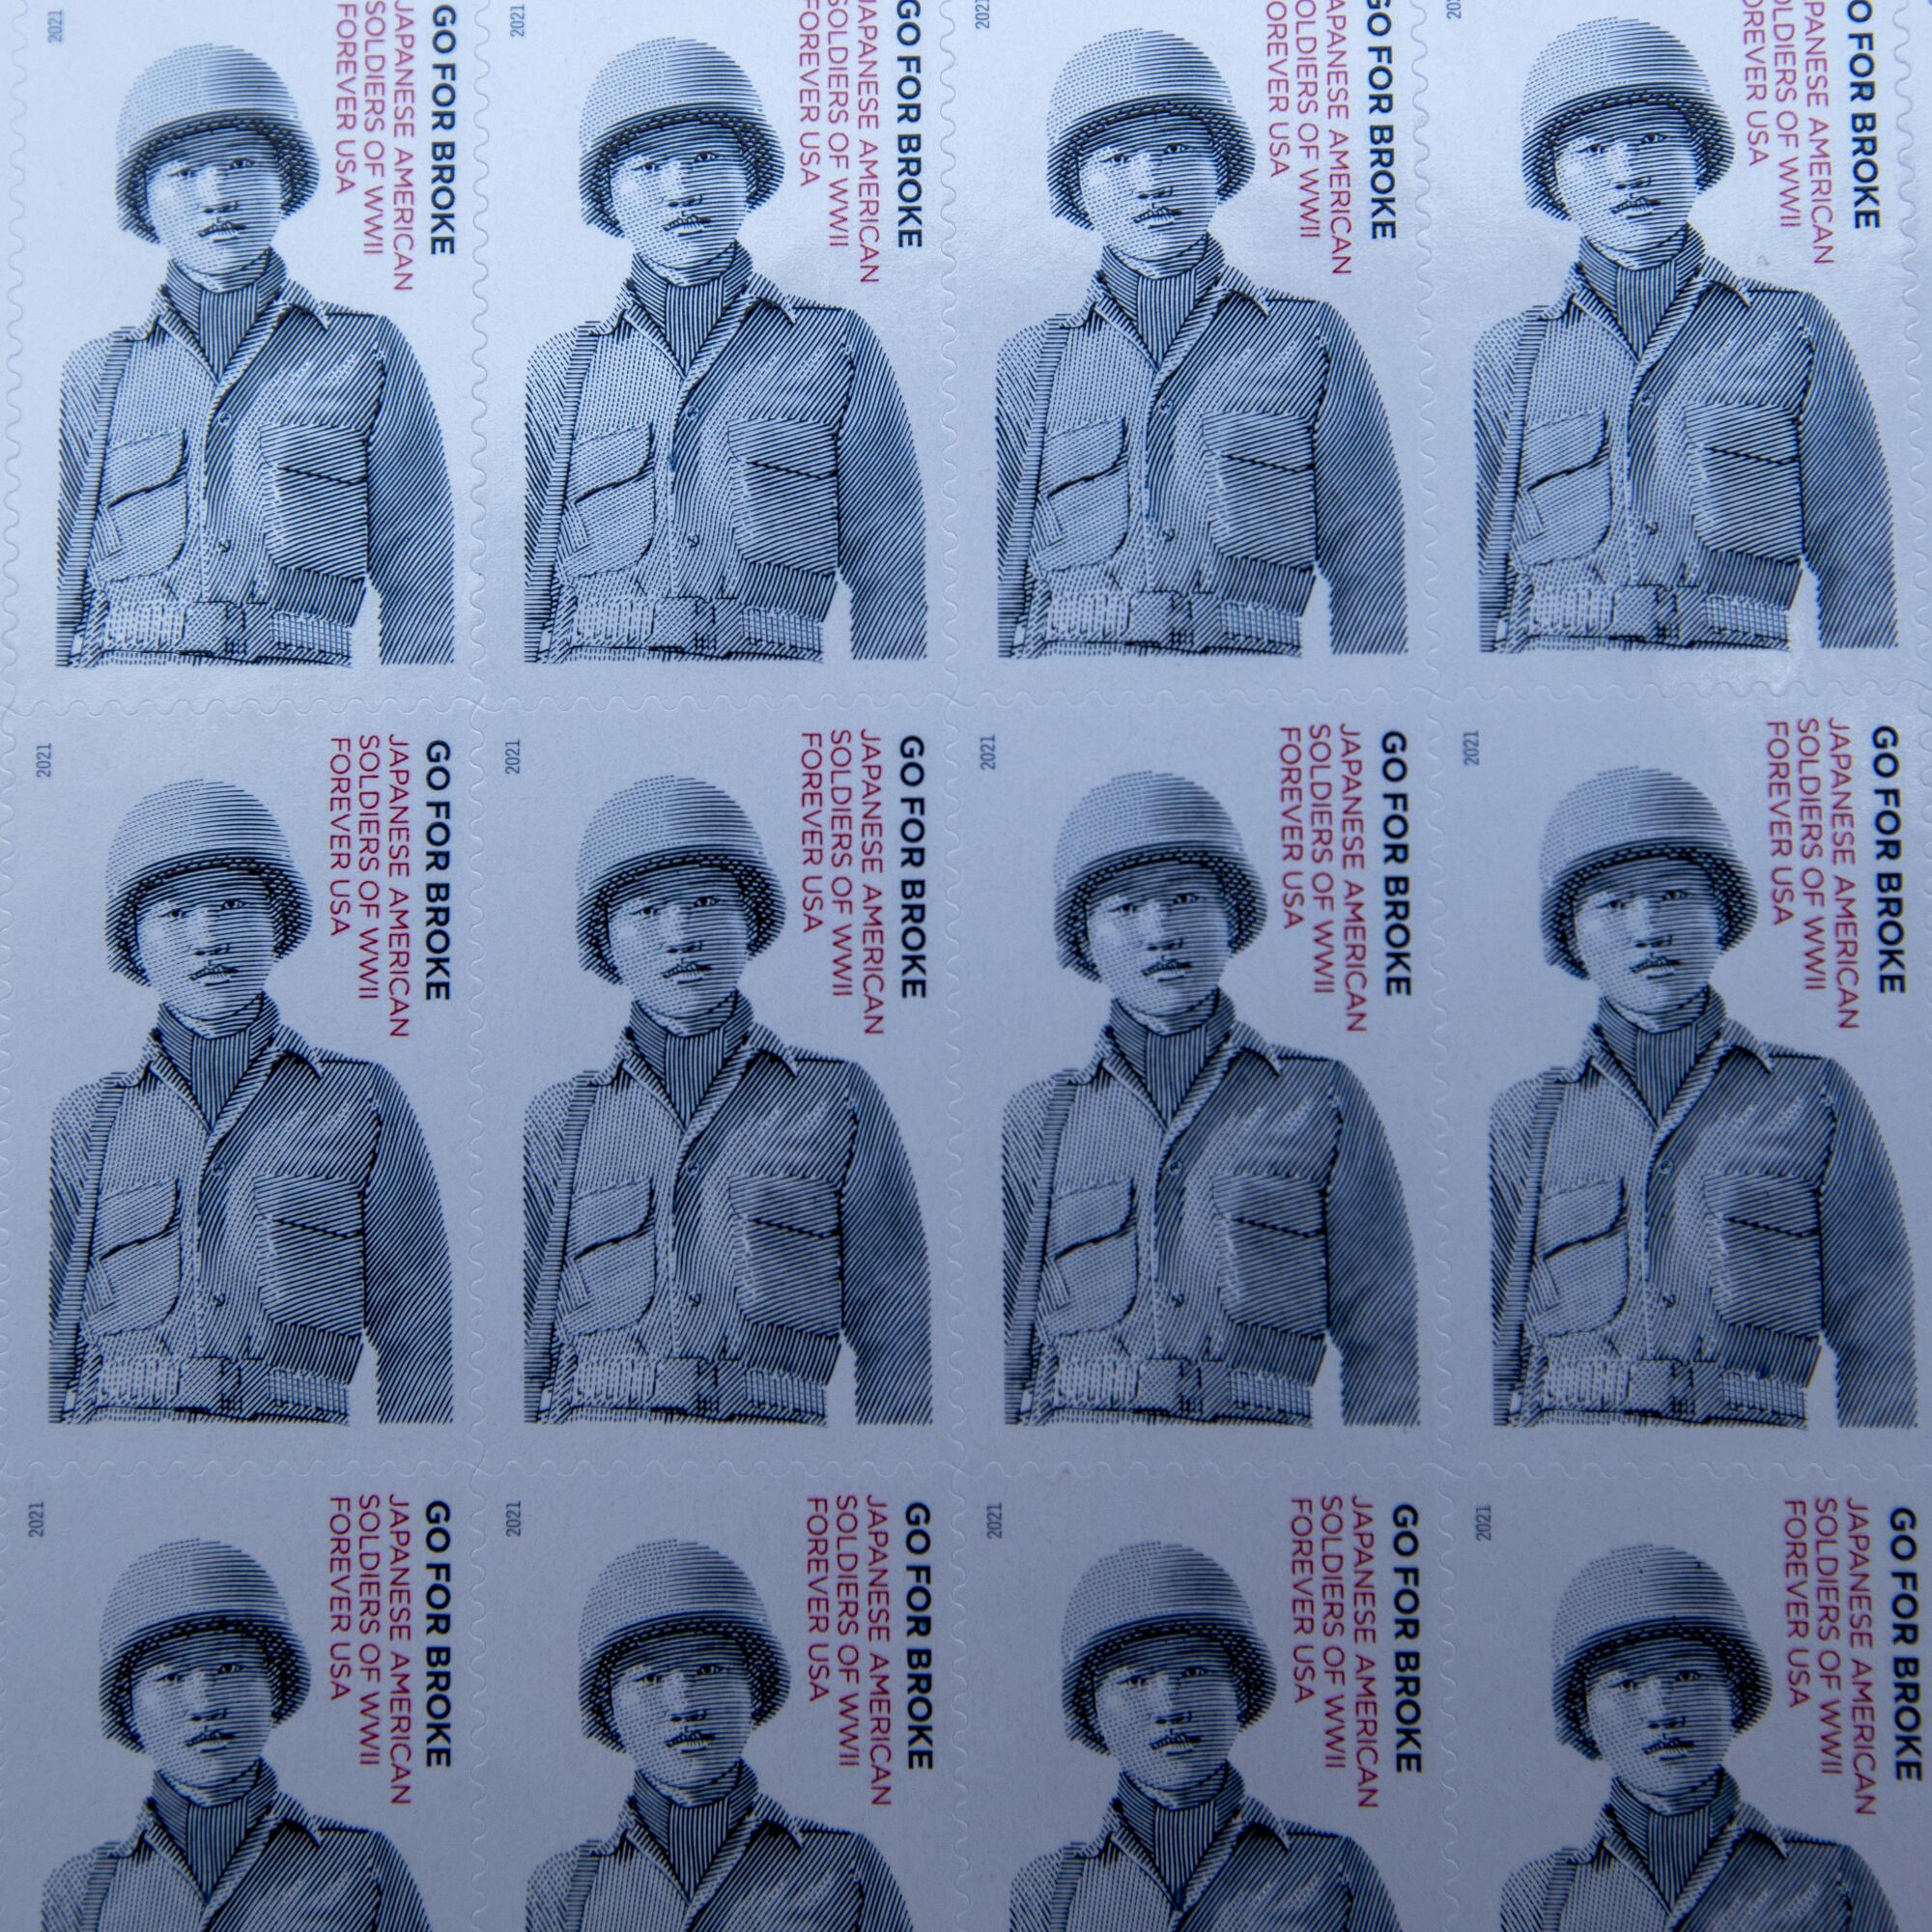 New US Postal stamps "Go For Broke" at the Japanese American National Museum.